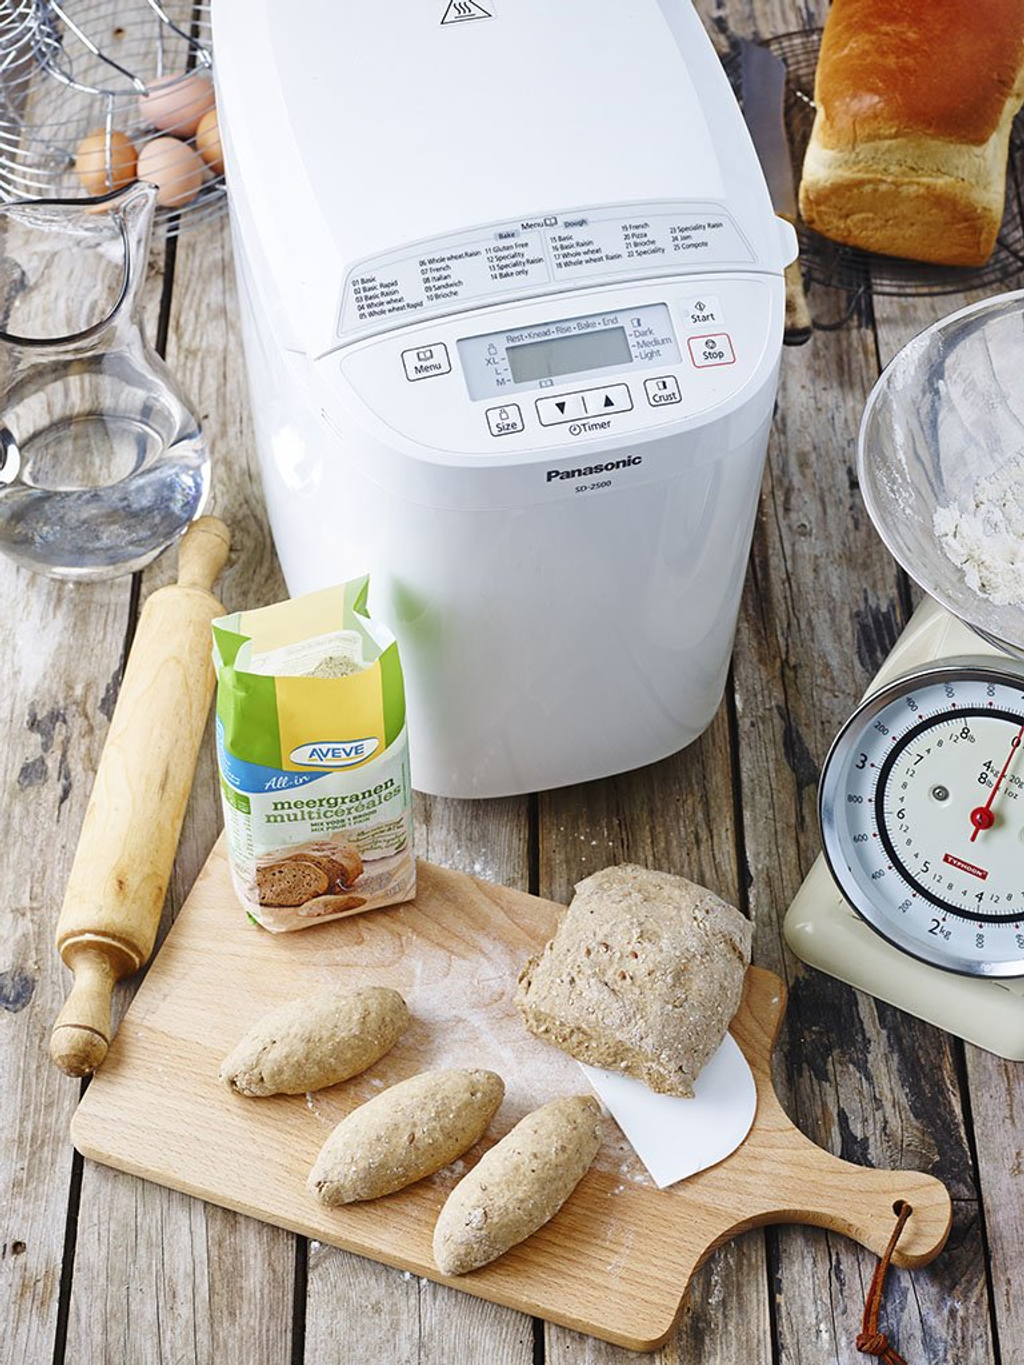 Bake delicious fresh bread at home with the Panasonic bread maker from BIYU